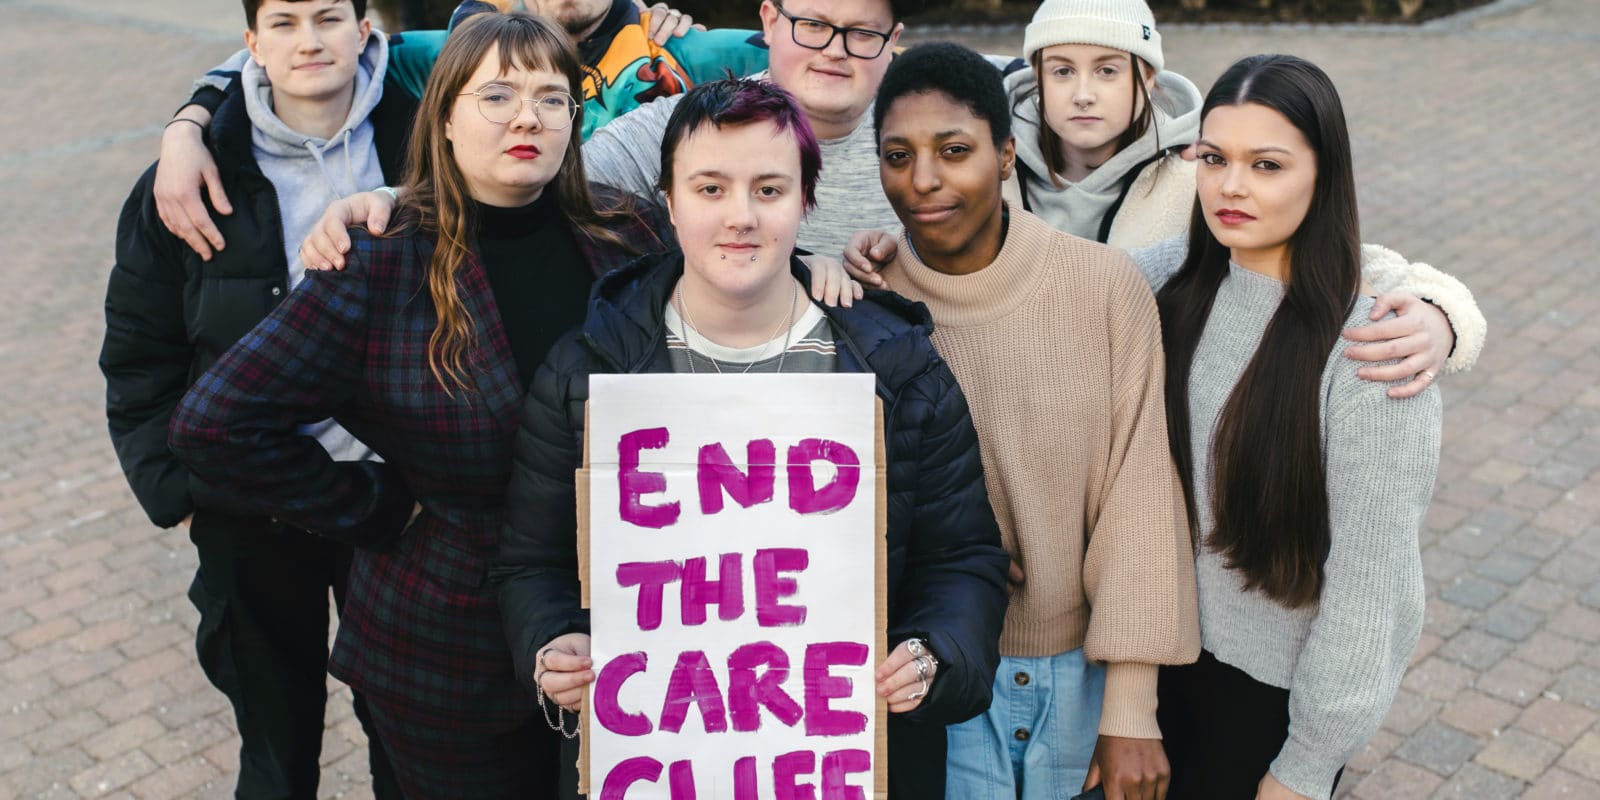 Group of young people staring into camera with end the care cliff sign